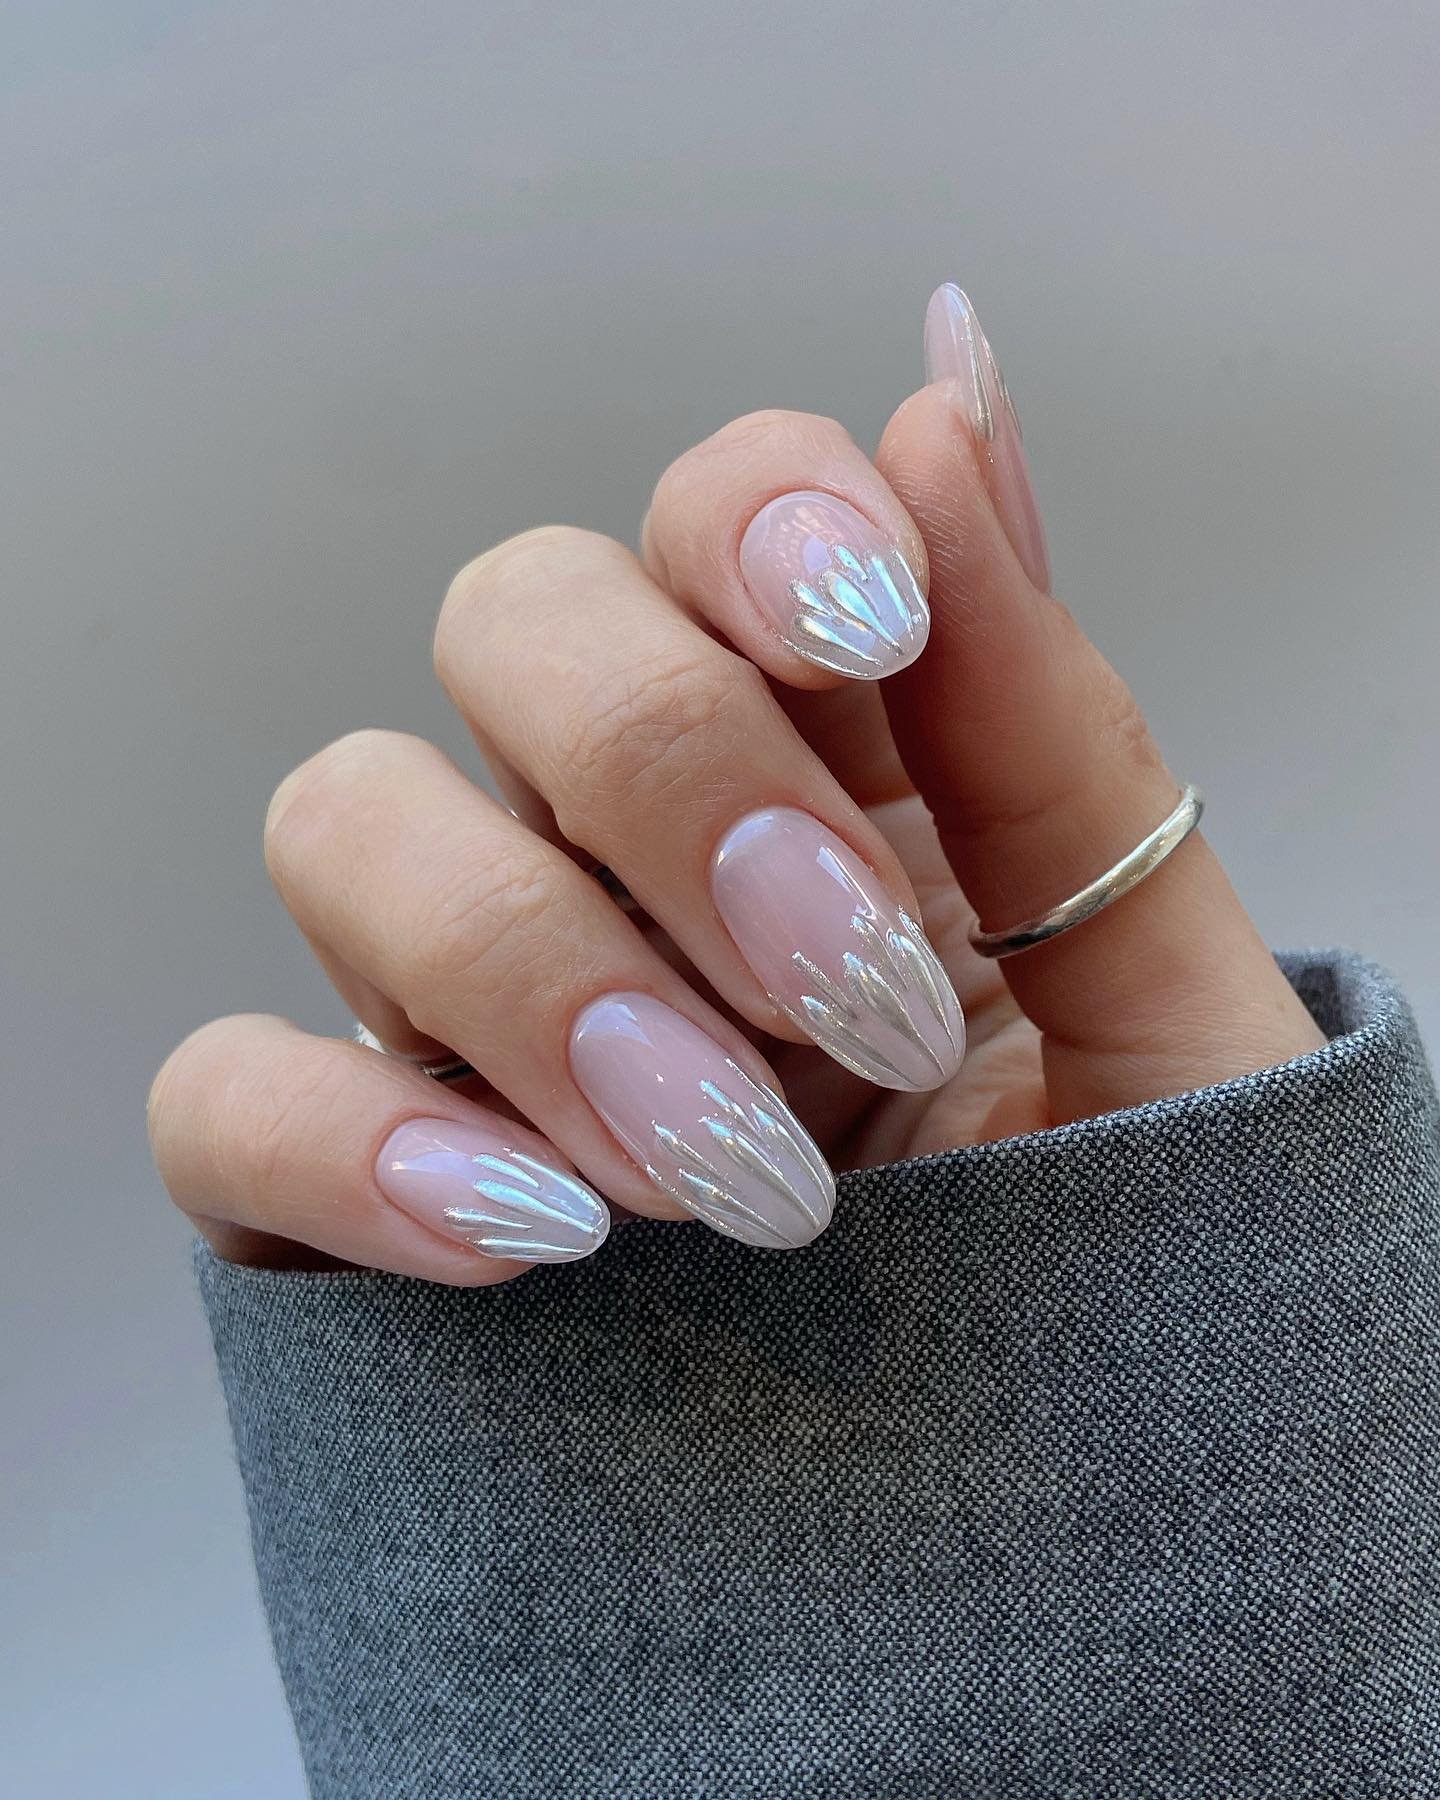 19 - Picture of Chrome Nails